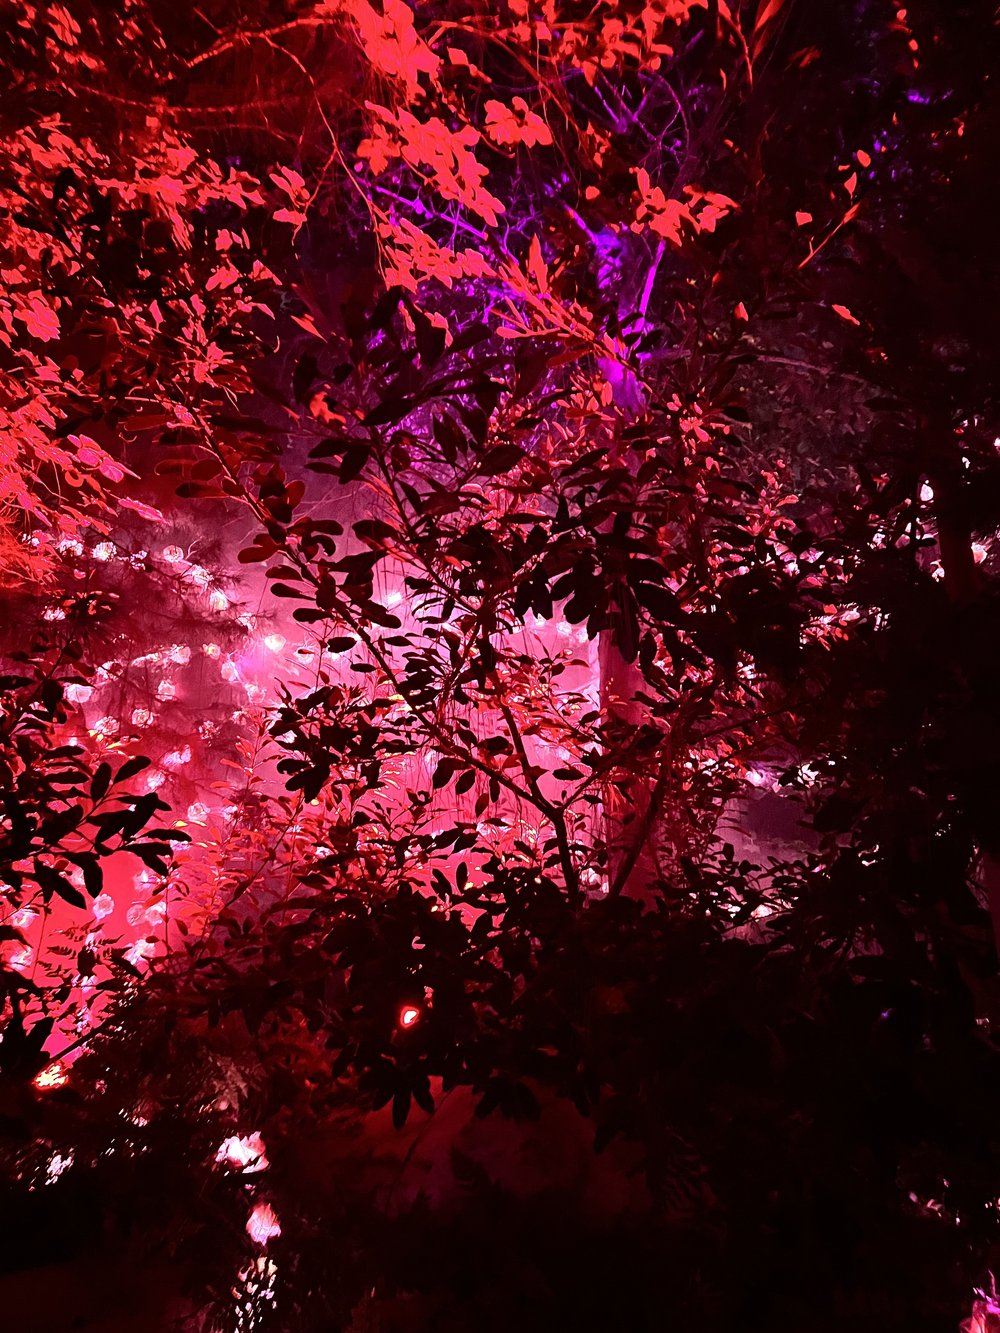  Red colored lights on foliage 